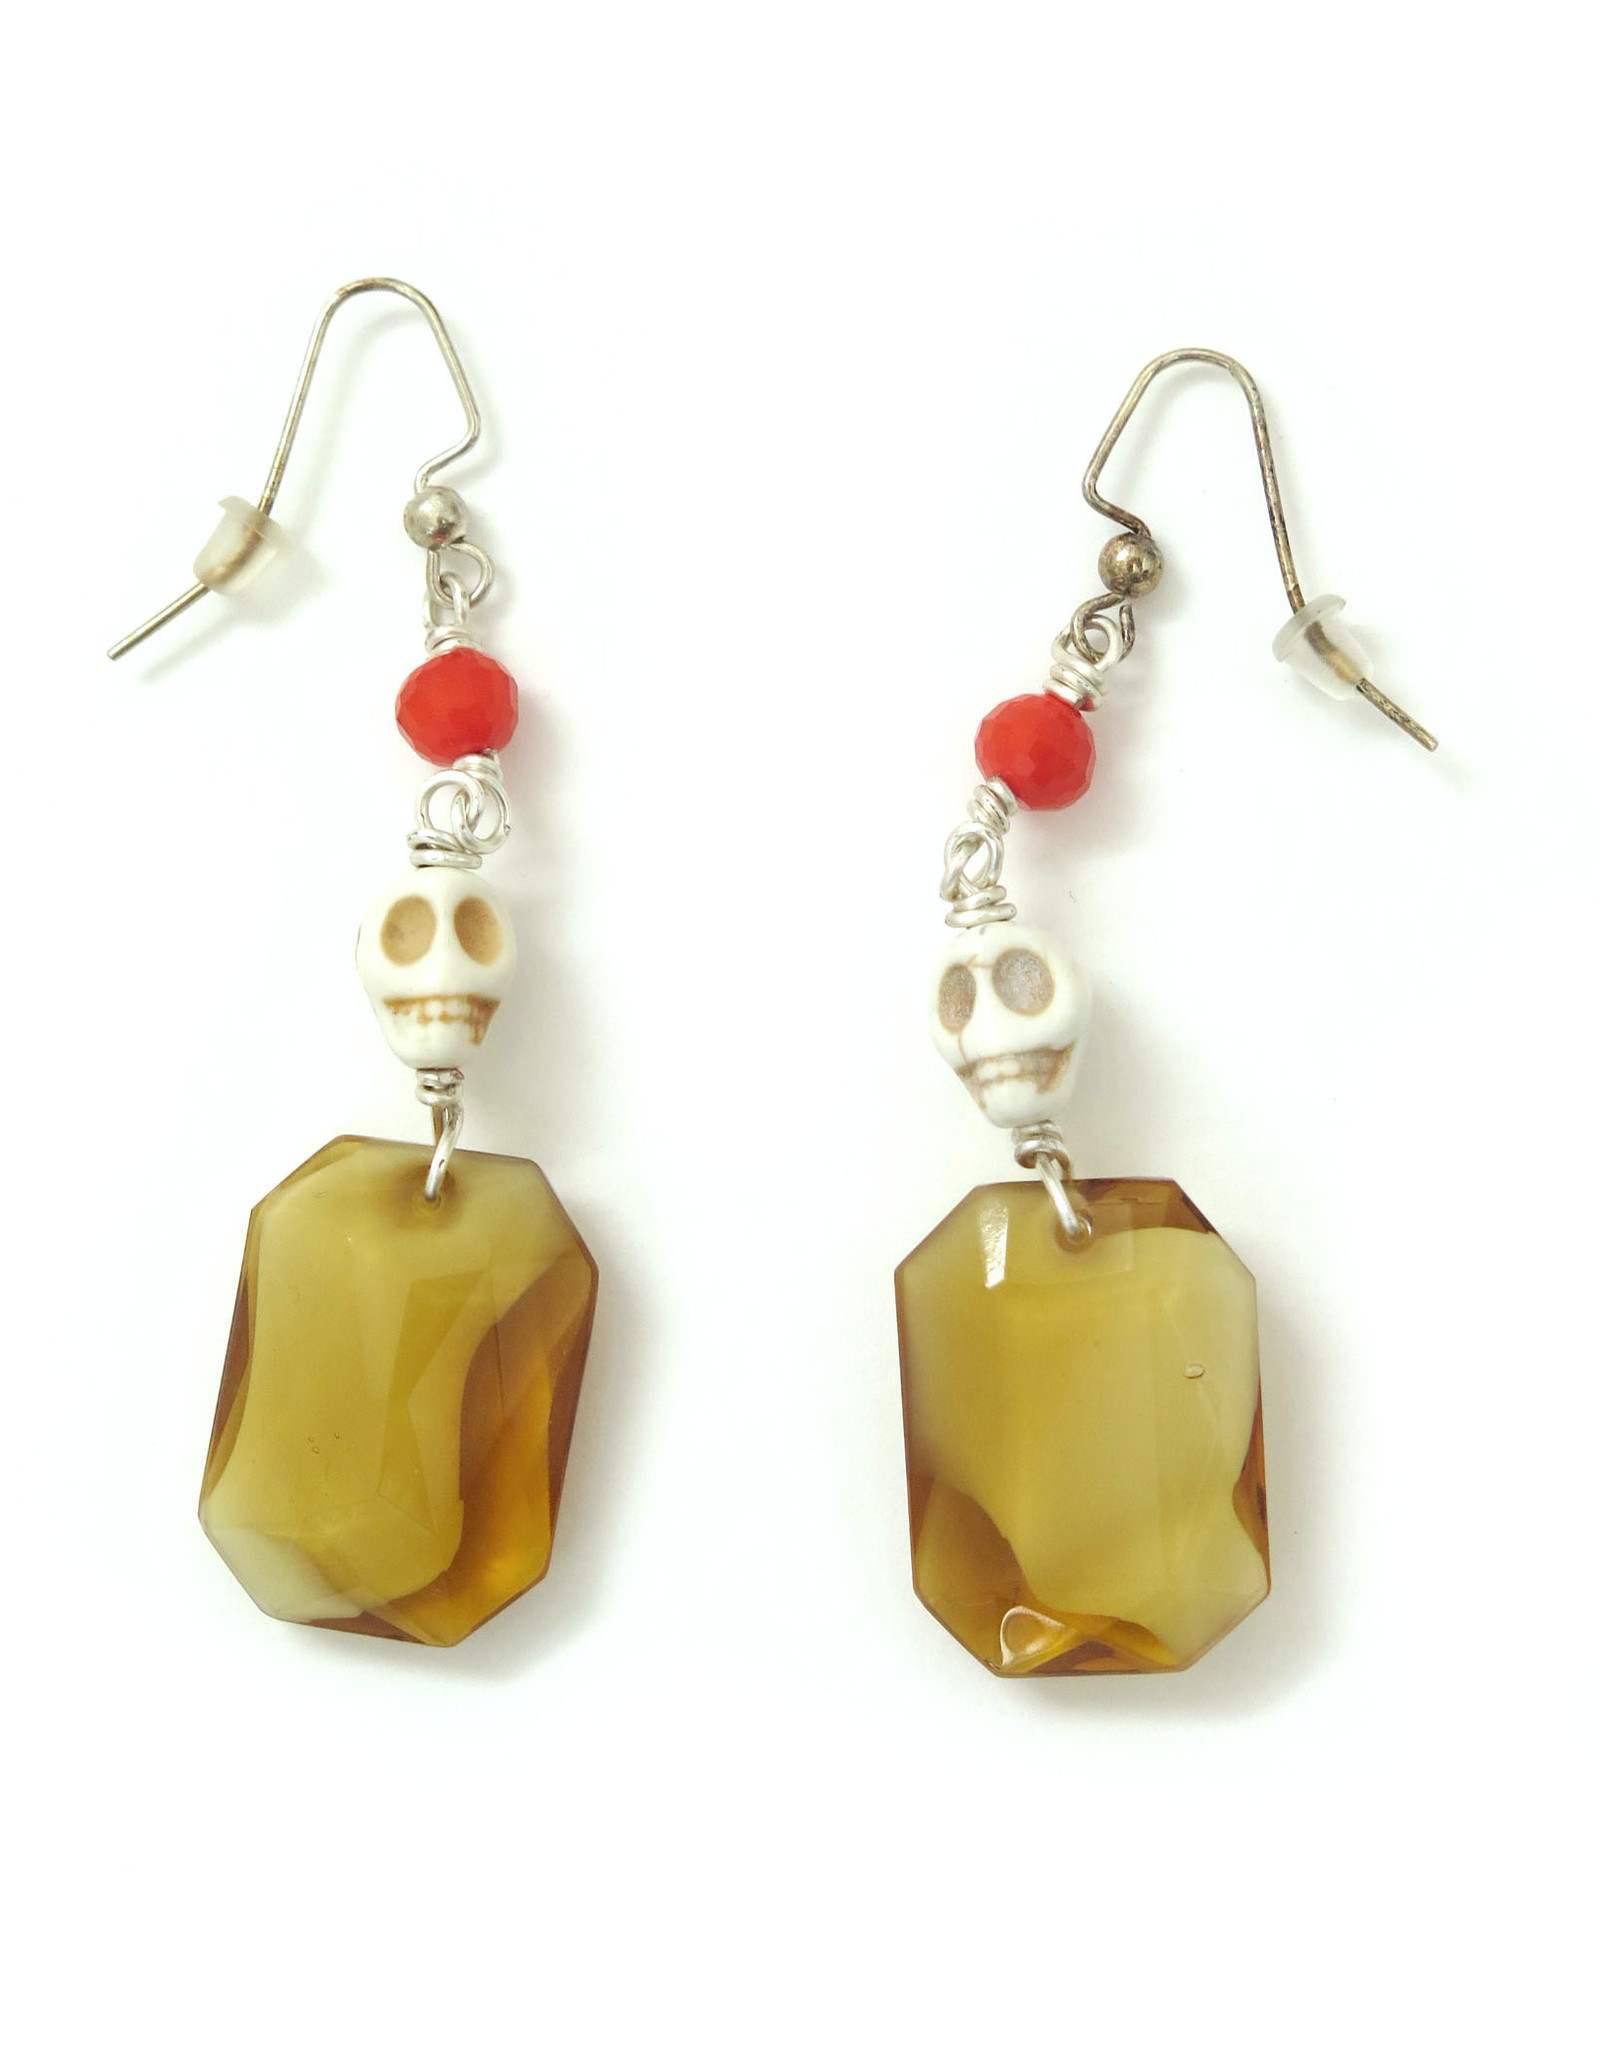 Skull Earrings with Large Amber Jewel by Dana Diederich